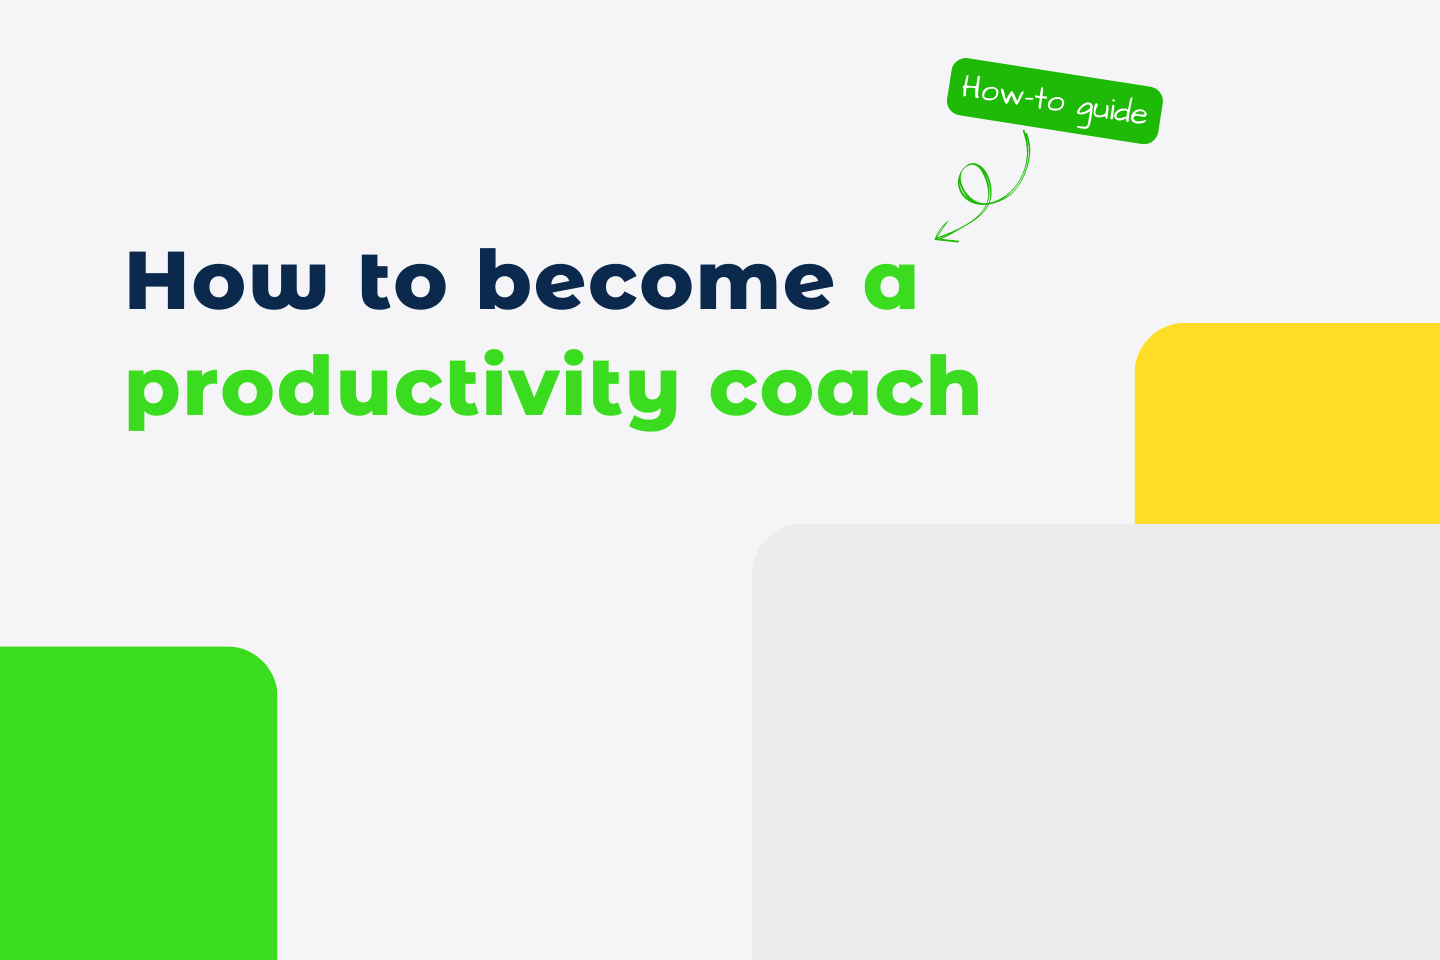 How to become a productivity coach